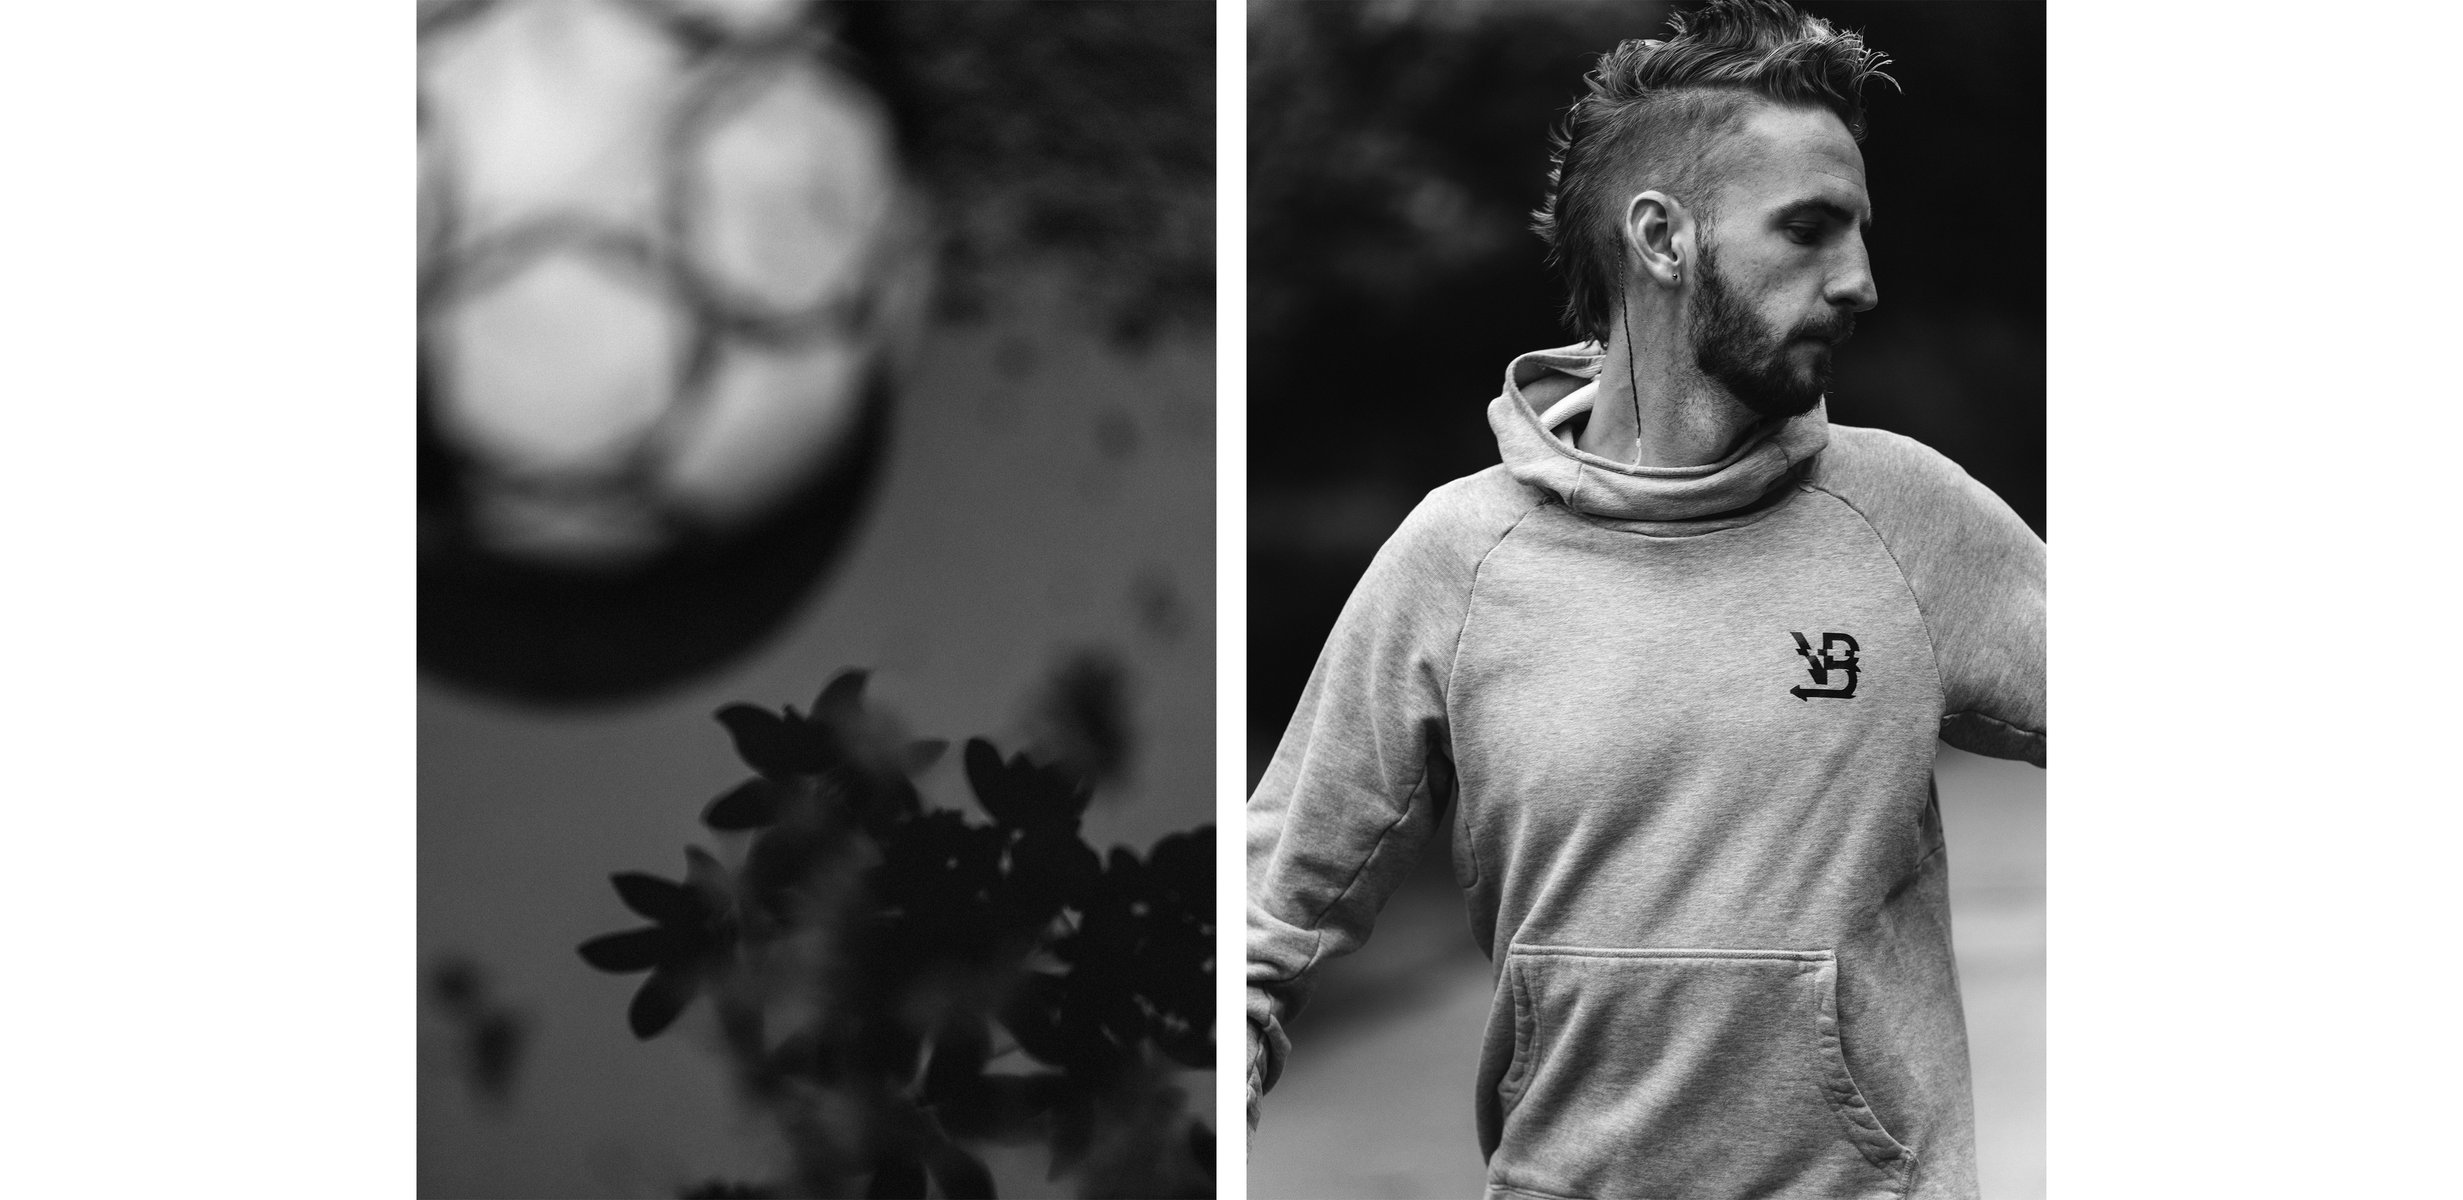  Diptych:

Left image: a black and white image of a soccer ball in a puddle that is reflecting the trees and the sky.

Right image: a black and white image of a soccer player in motion and wearing a grey hoodie. He's looking towards camera right and reaching in that direction. by Sydney SG